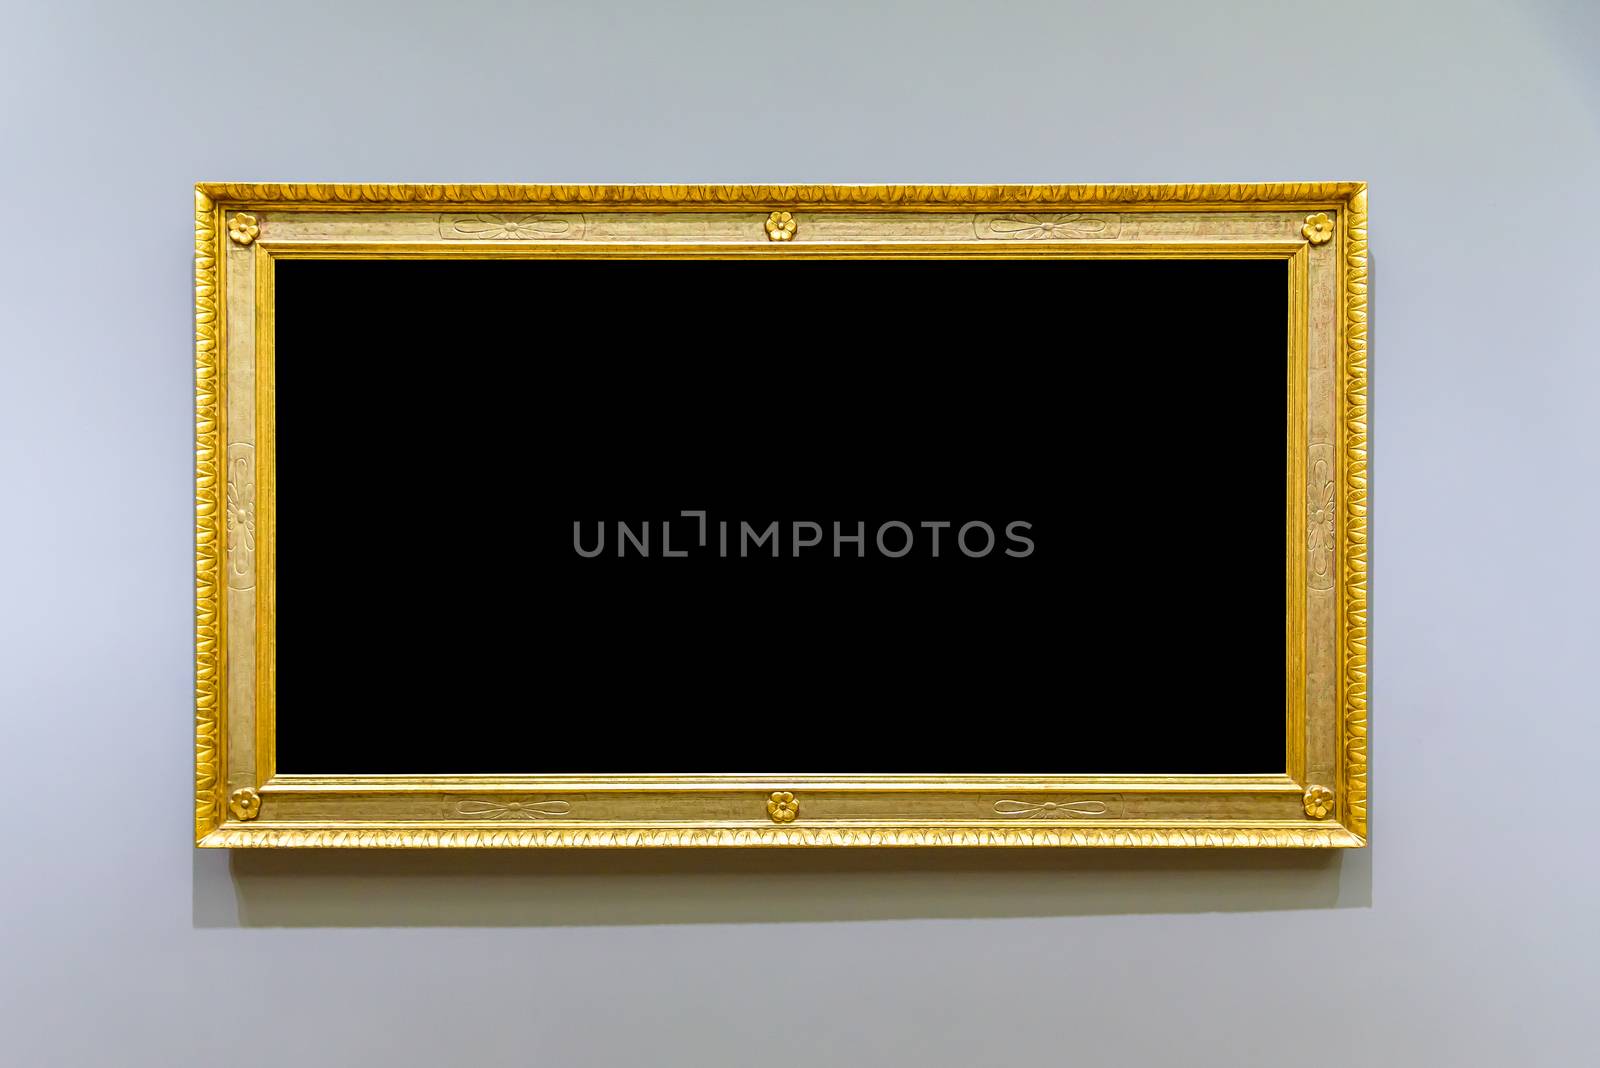 Empty golden picture frame on the gray wall